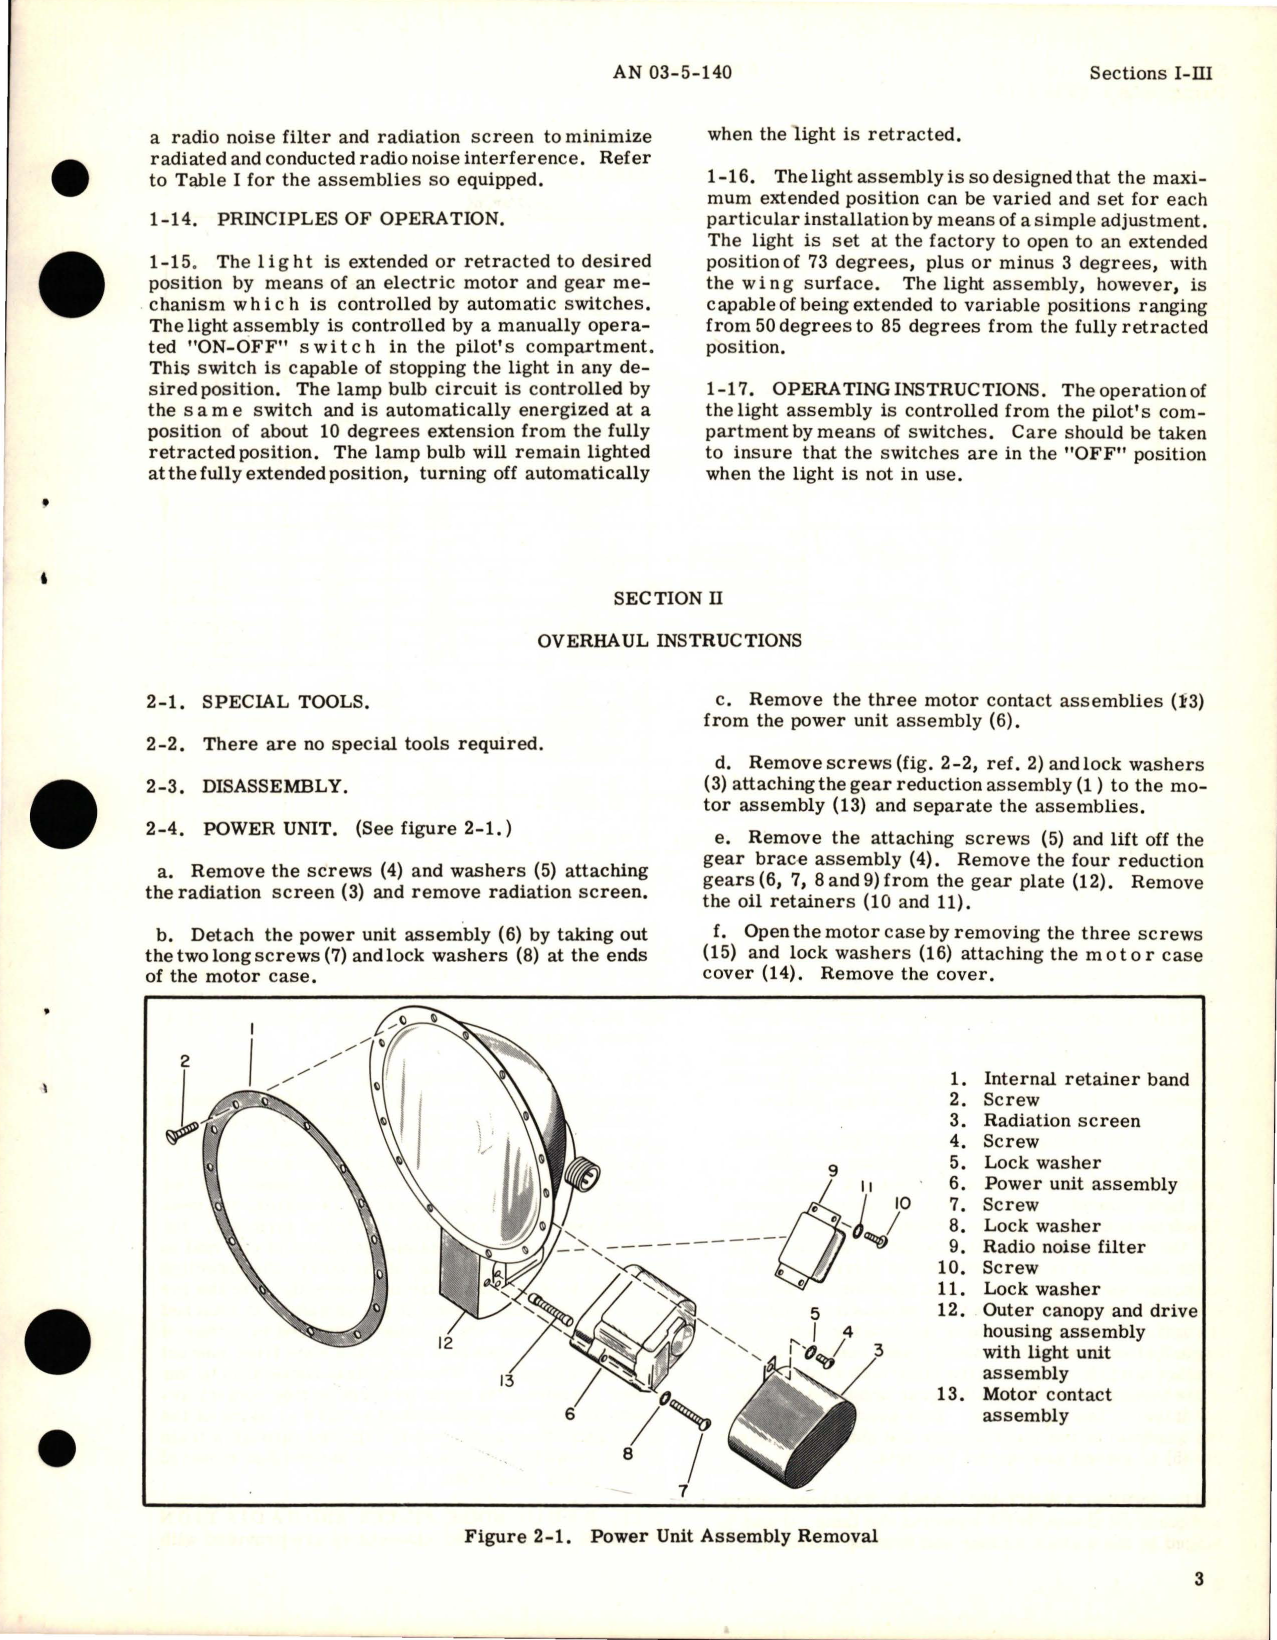 Sample page 7 from AirCorps Library document: Overhaul Instructions for Landing Light Assembly - AN 3095